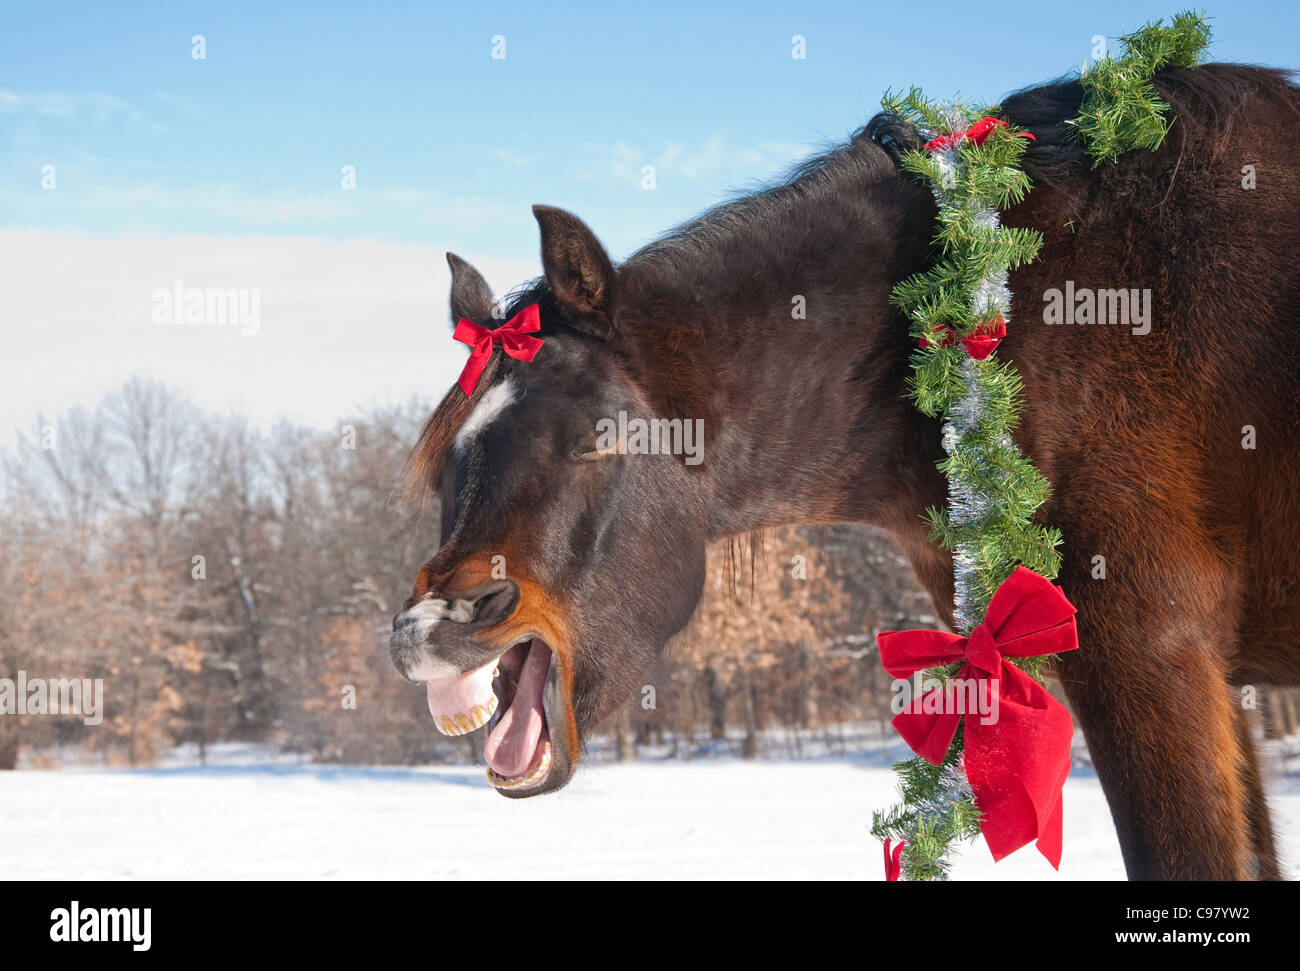 Comical image of a dark bay horse yawning while wearing a bright Christmas wreath and a bow with winter background Stock Photo